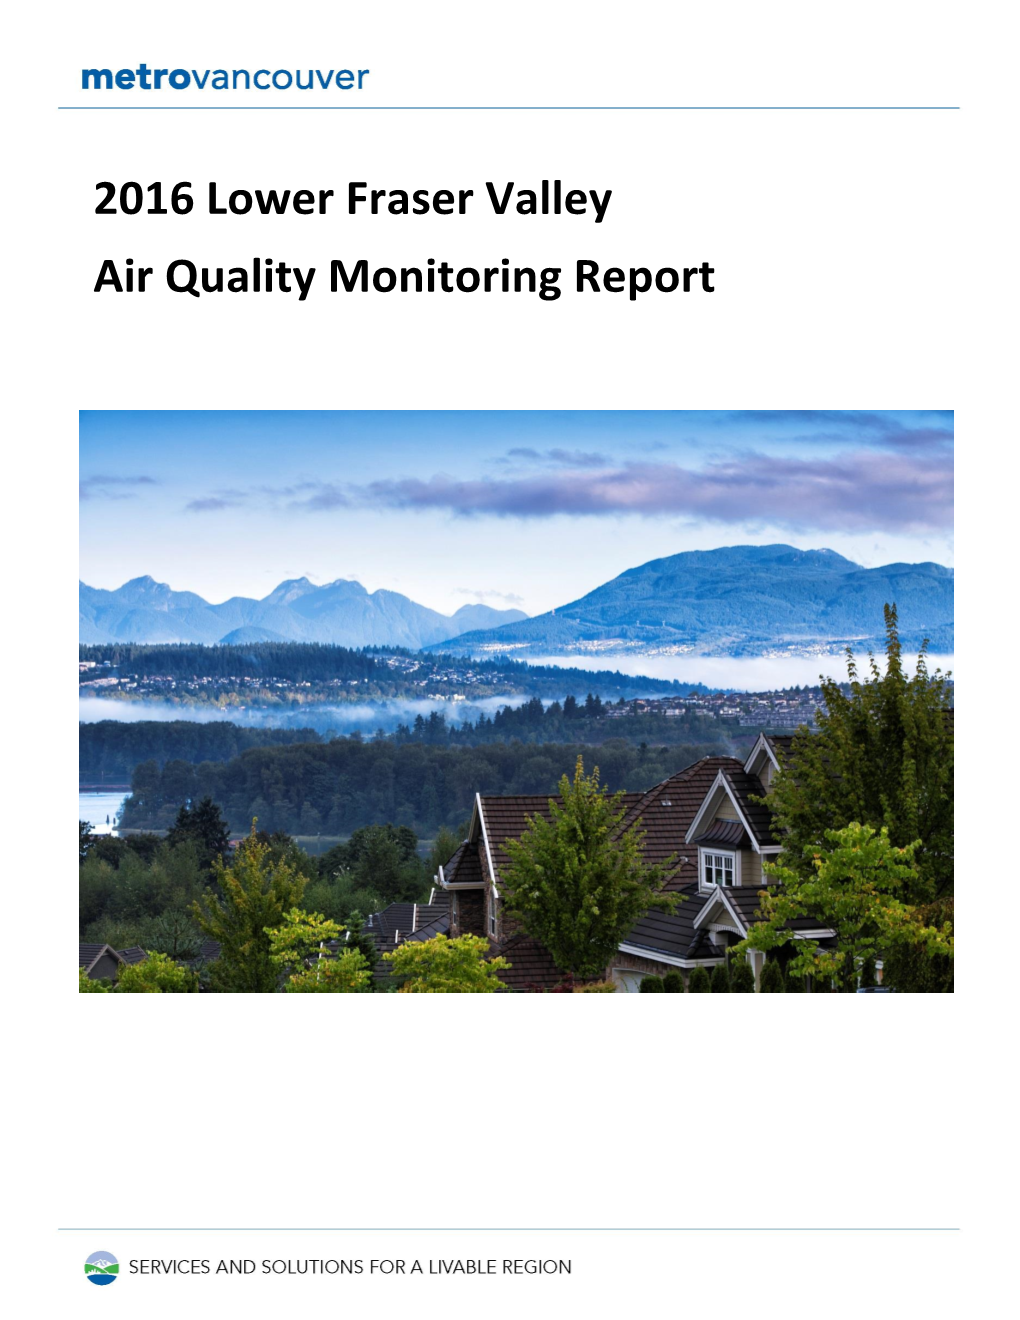 2016 Lower Fraser Valley Air Quality Monitoring Report